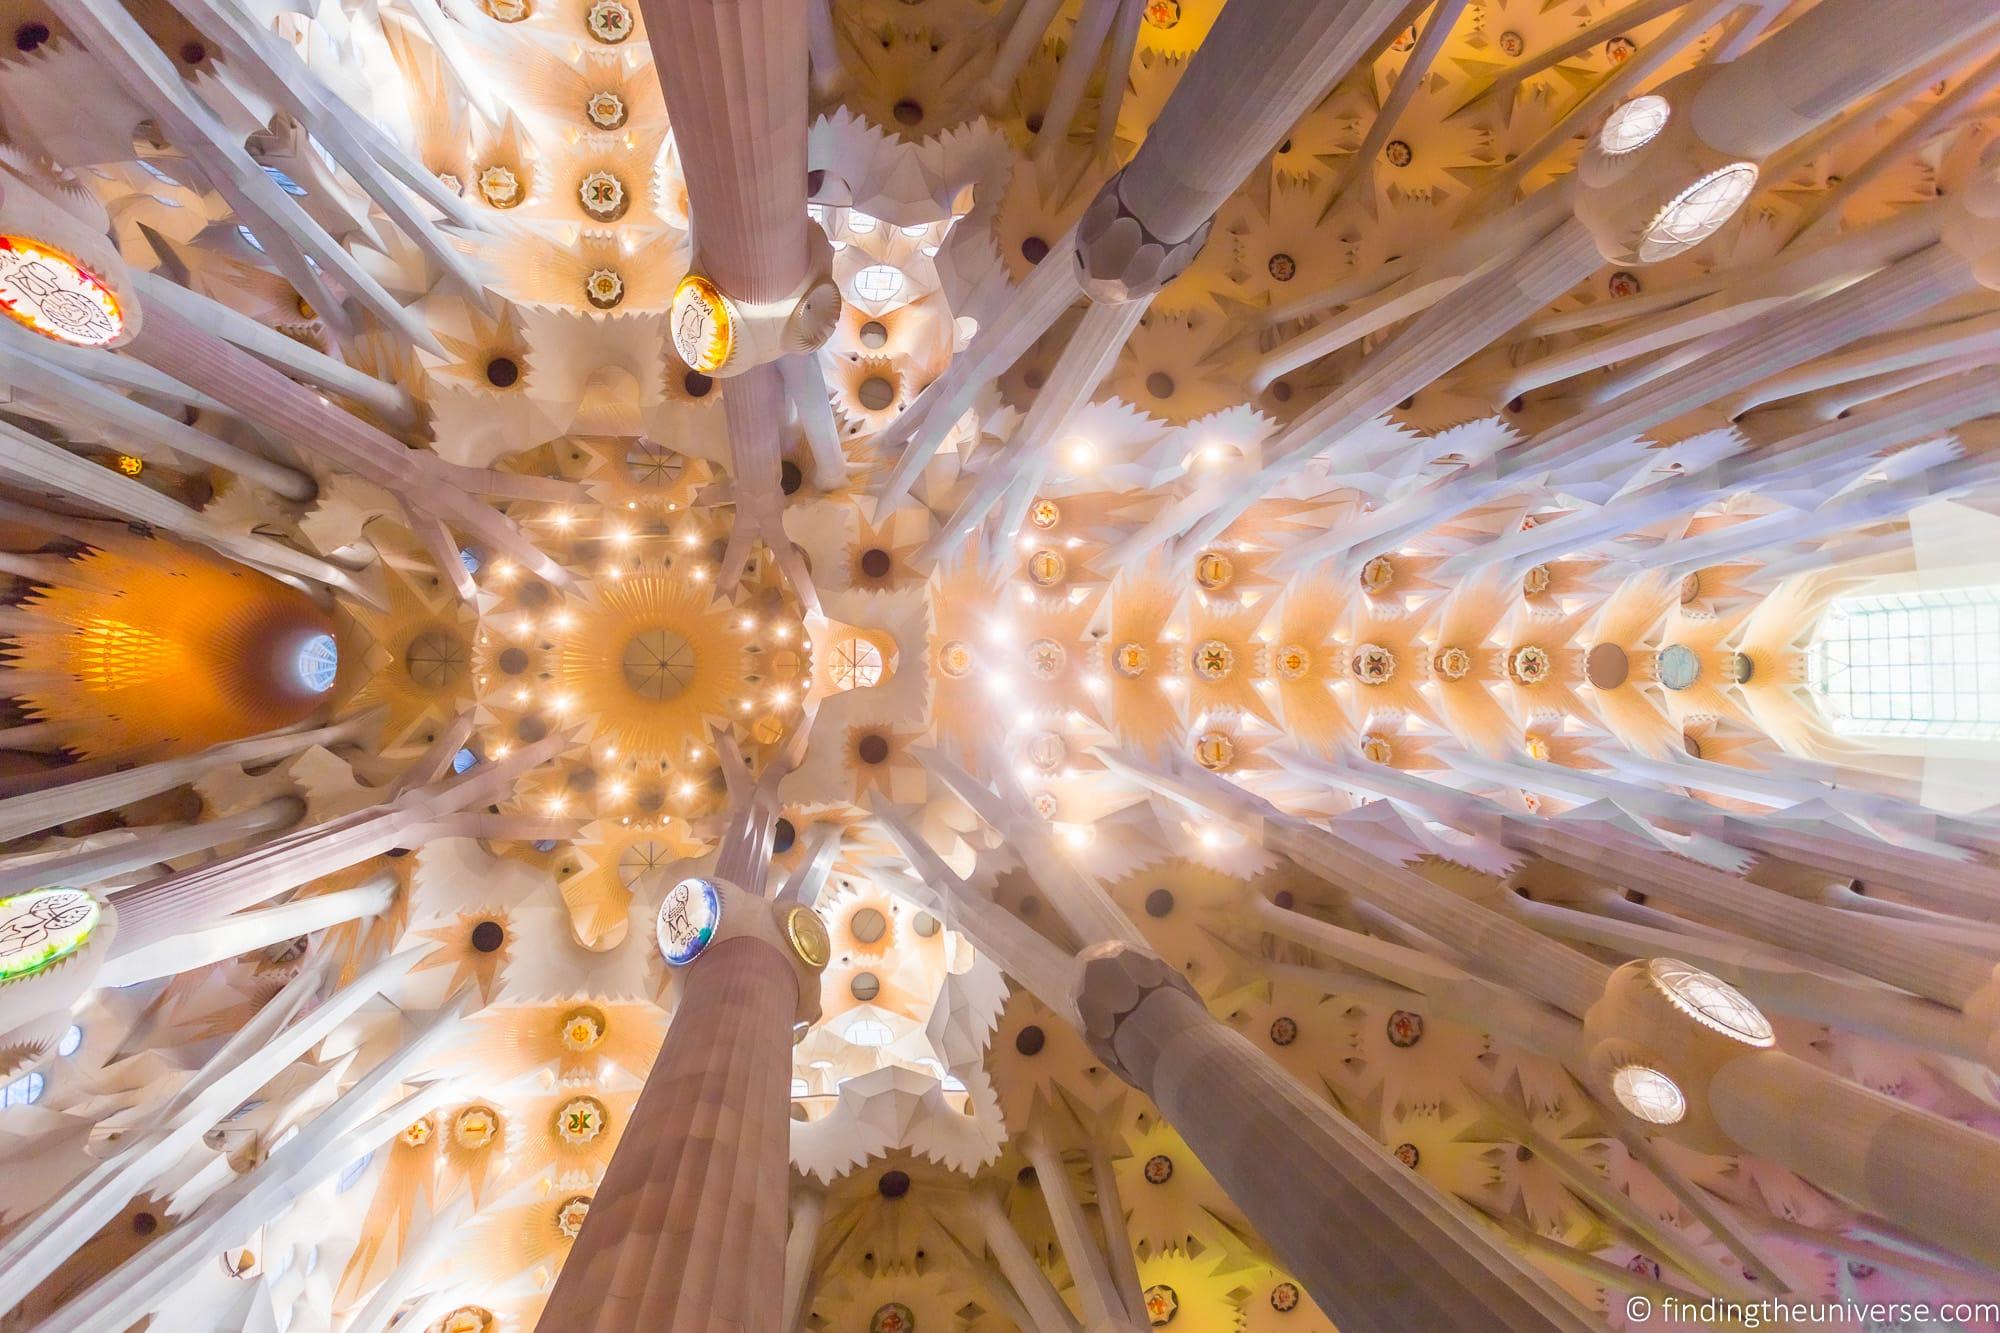 Guide to Visiting the Sagrada Familia 2022: Tickets, Tips and More!